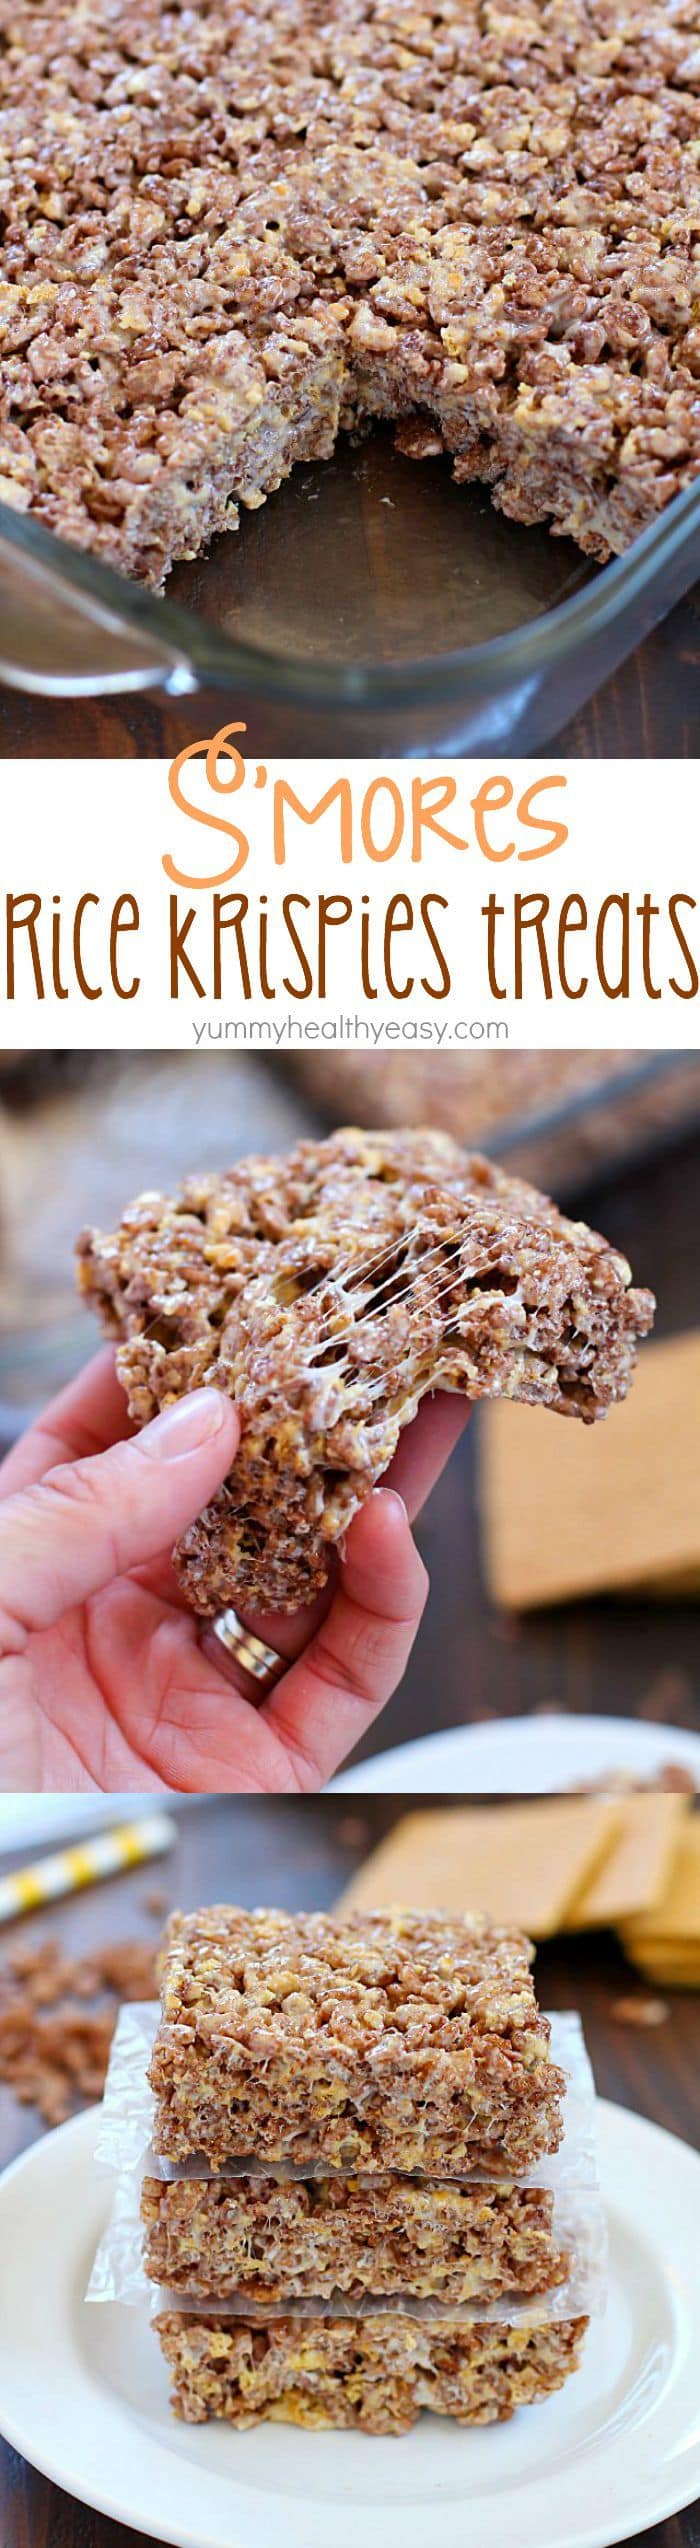 Take those boring rice krispies treats to a whole new level and make them into S'mores Rice Krispies Treats! With marshmallow, graham crackers and Cocoa Krispies, these S'mores Rice Krispies Treats are the BOMB!